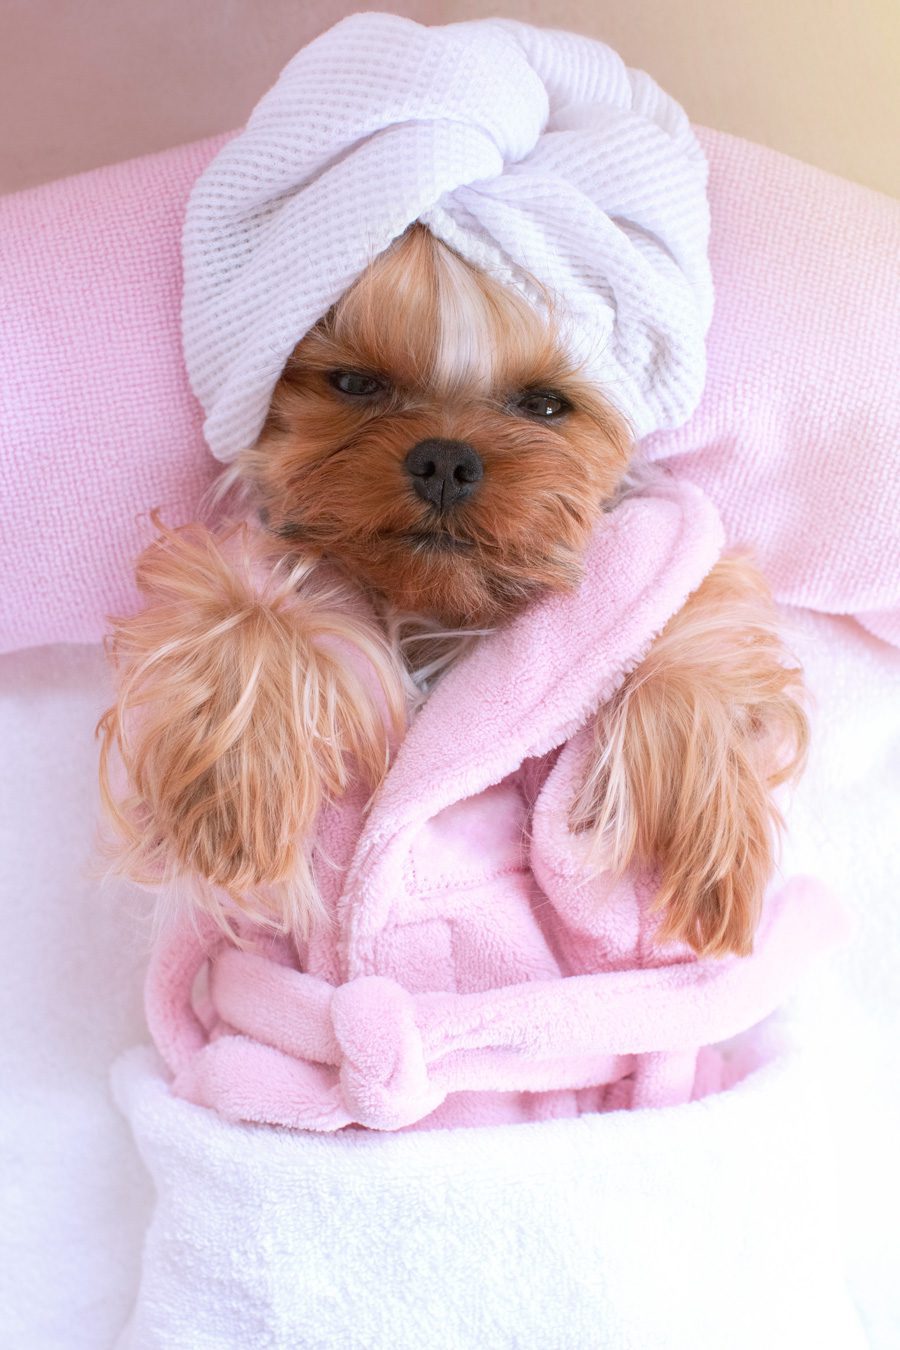 Dirty Dog Depot | Tega Cay, SC | pampered pup in pink bathrobe